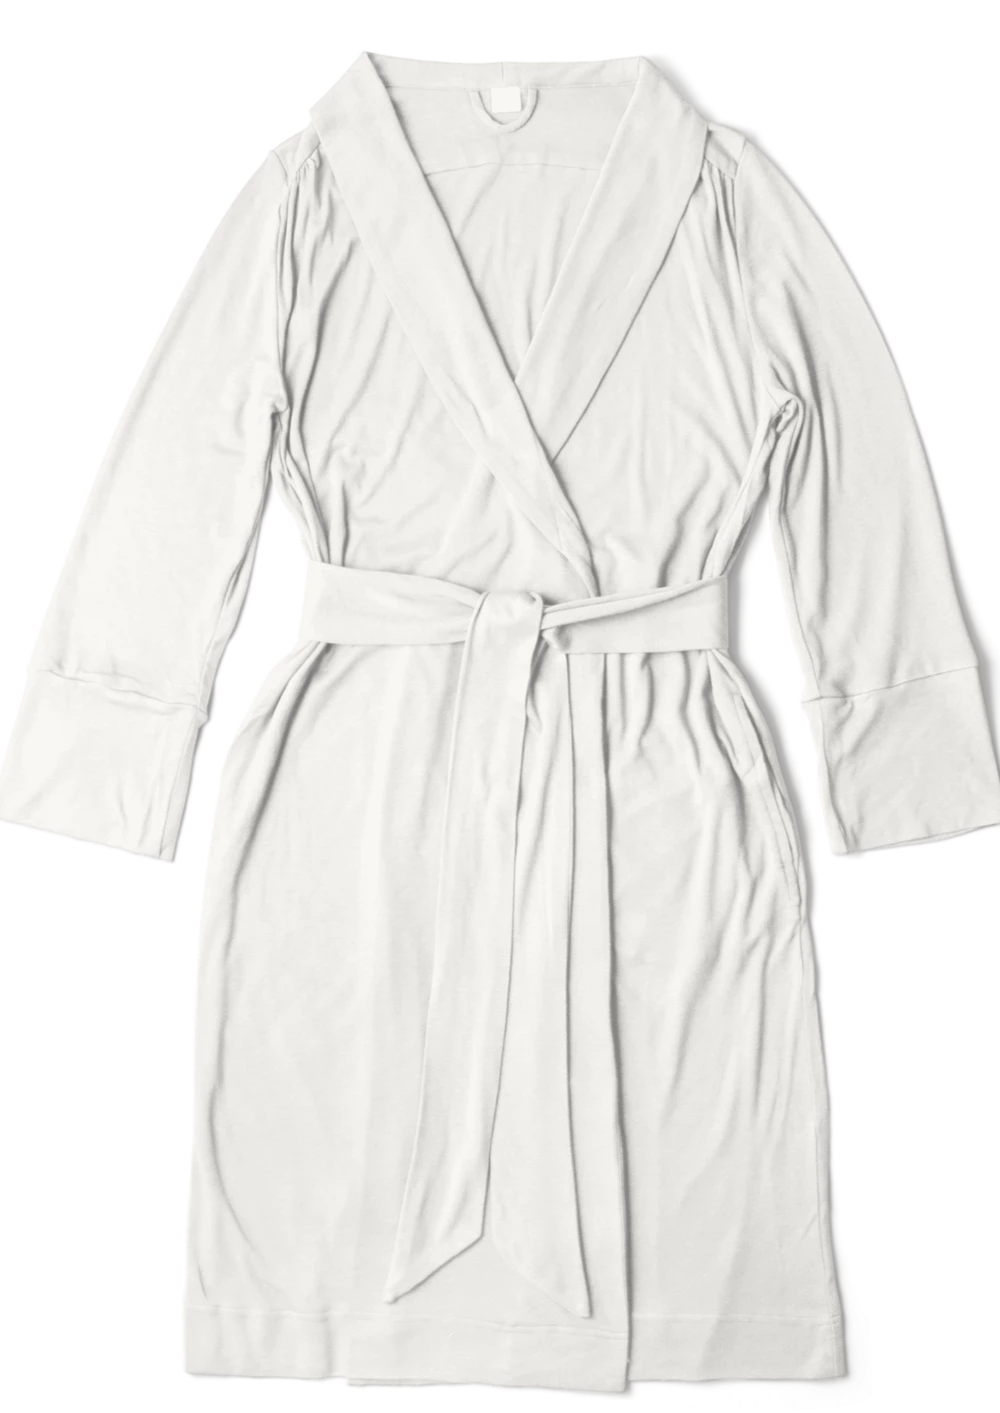 Luxurious maternity and nursing spa robe. Perfect gift for pregnant or breastfeeding mamas.